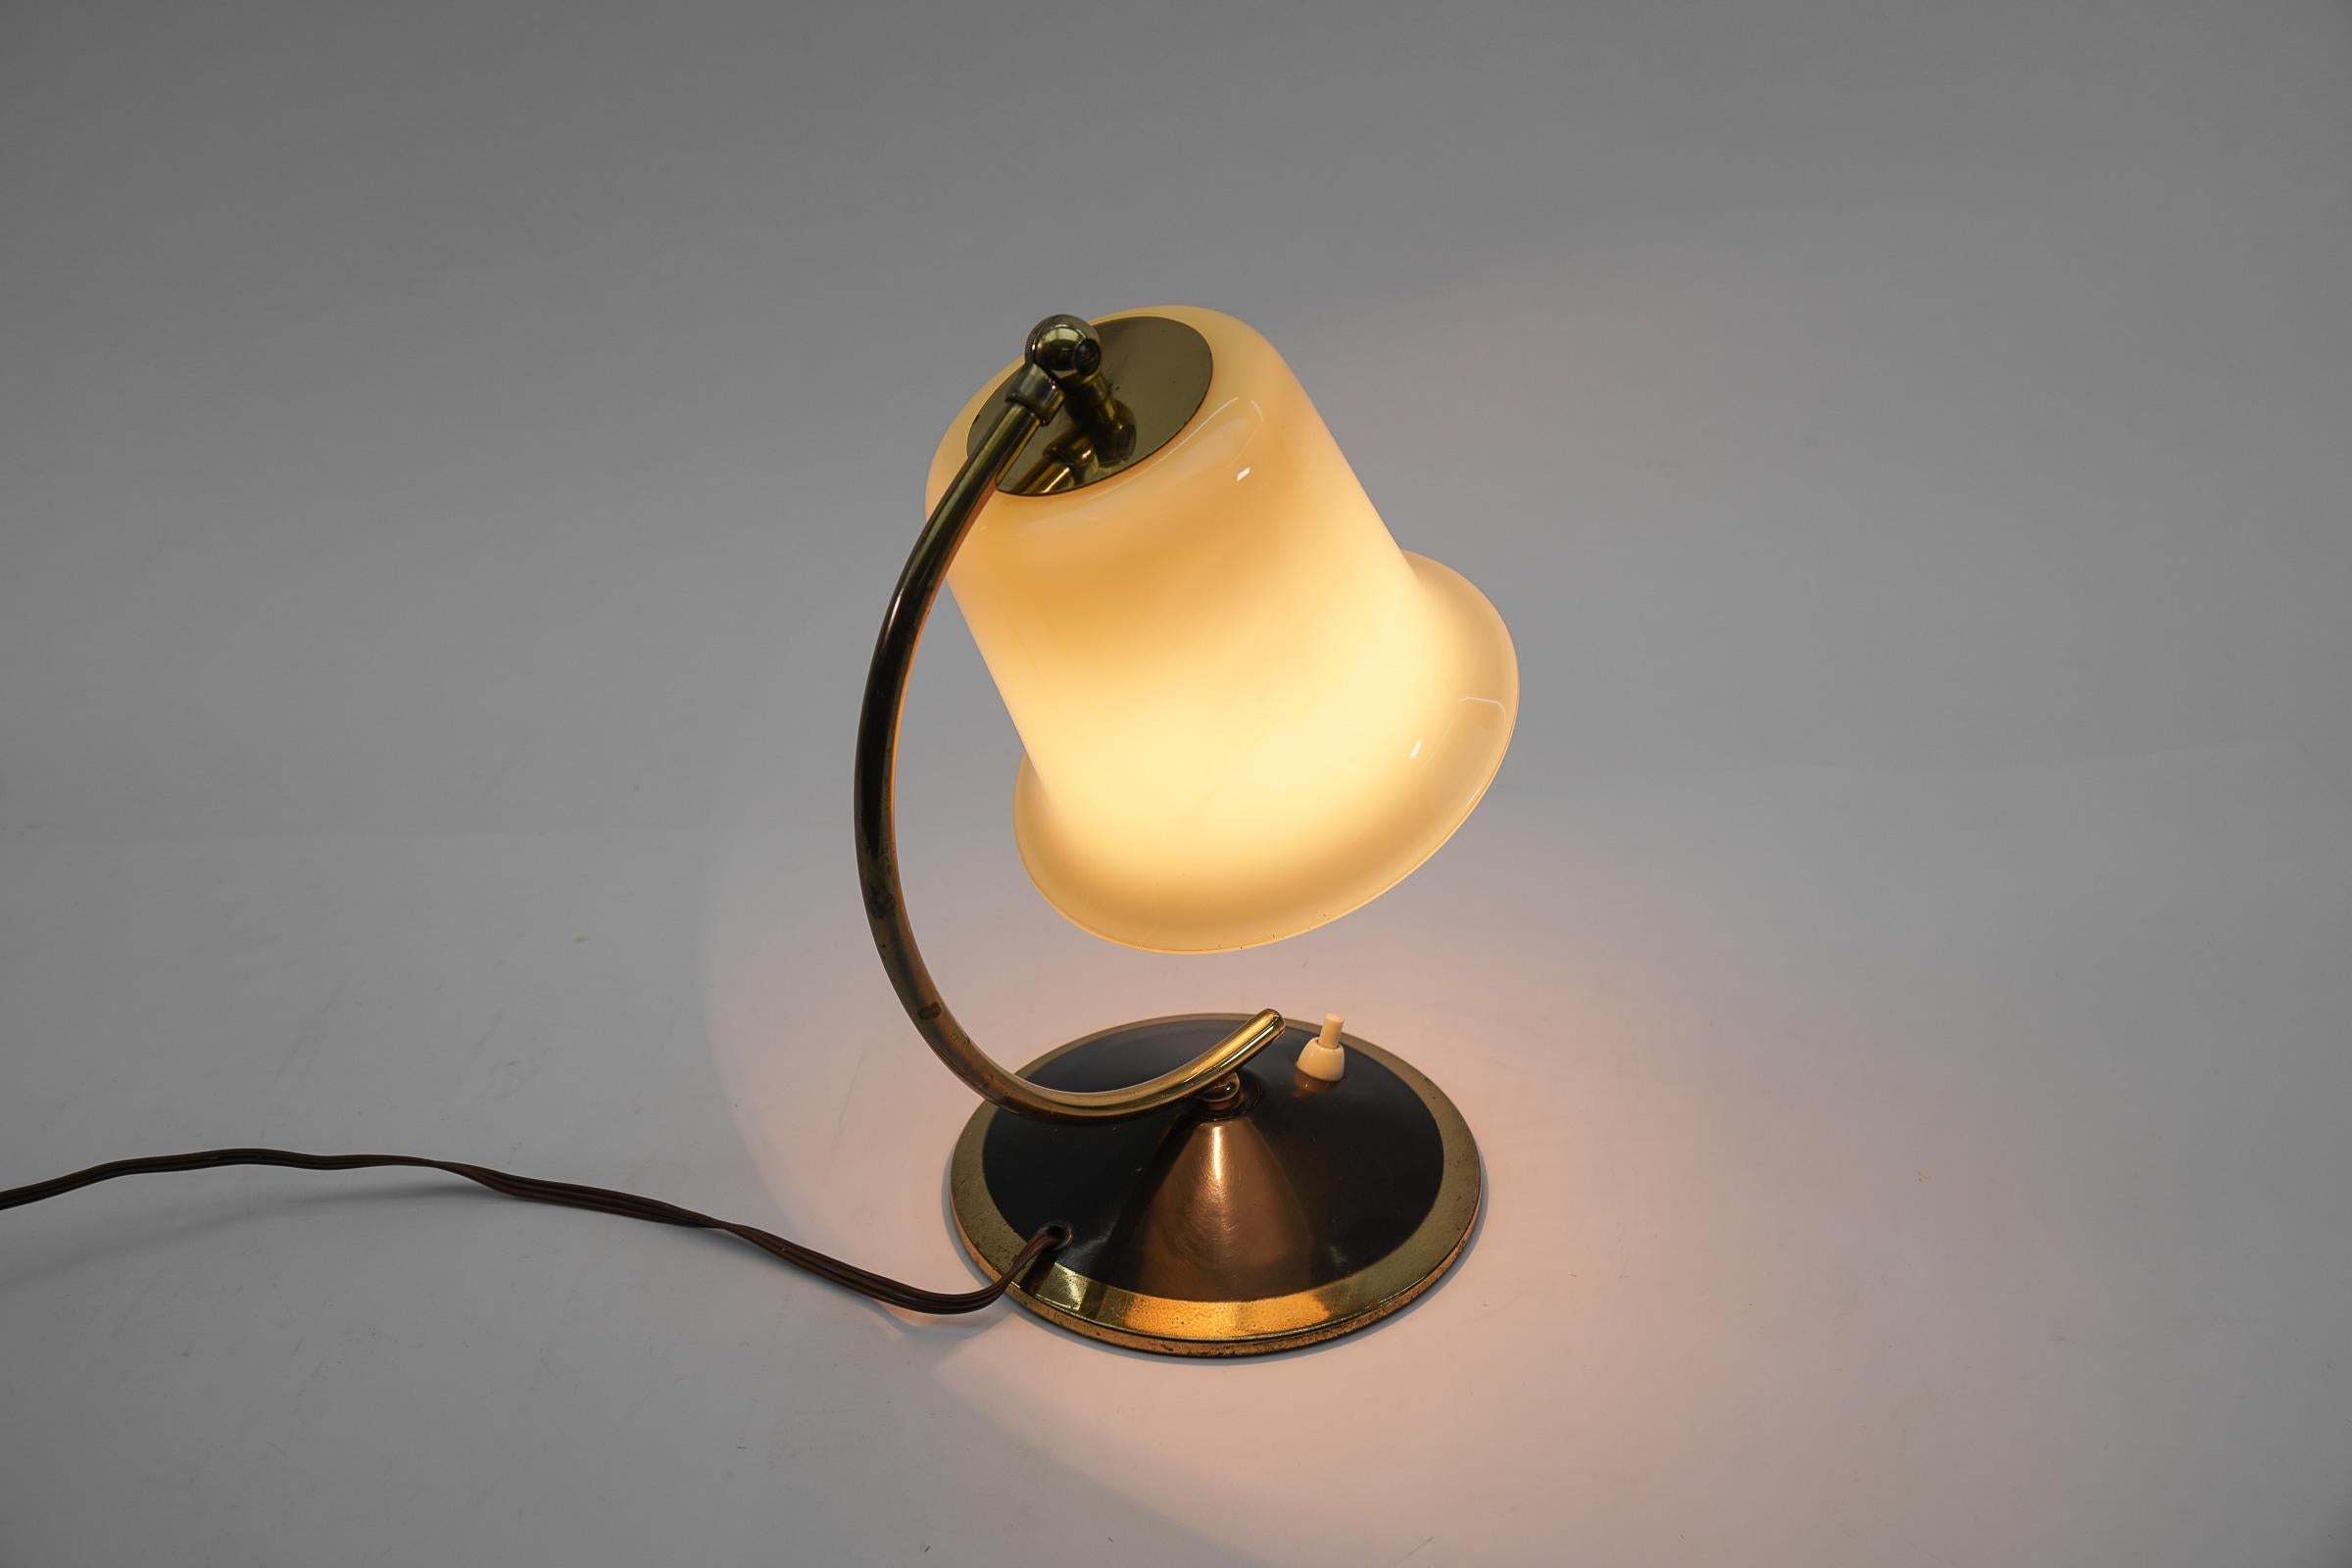 Mid-20th Century Lovely Midcentury Table Lampe Made in Glass and Brass, 1950s, Austria For Sale